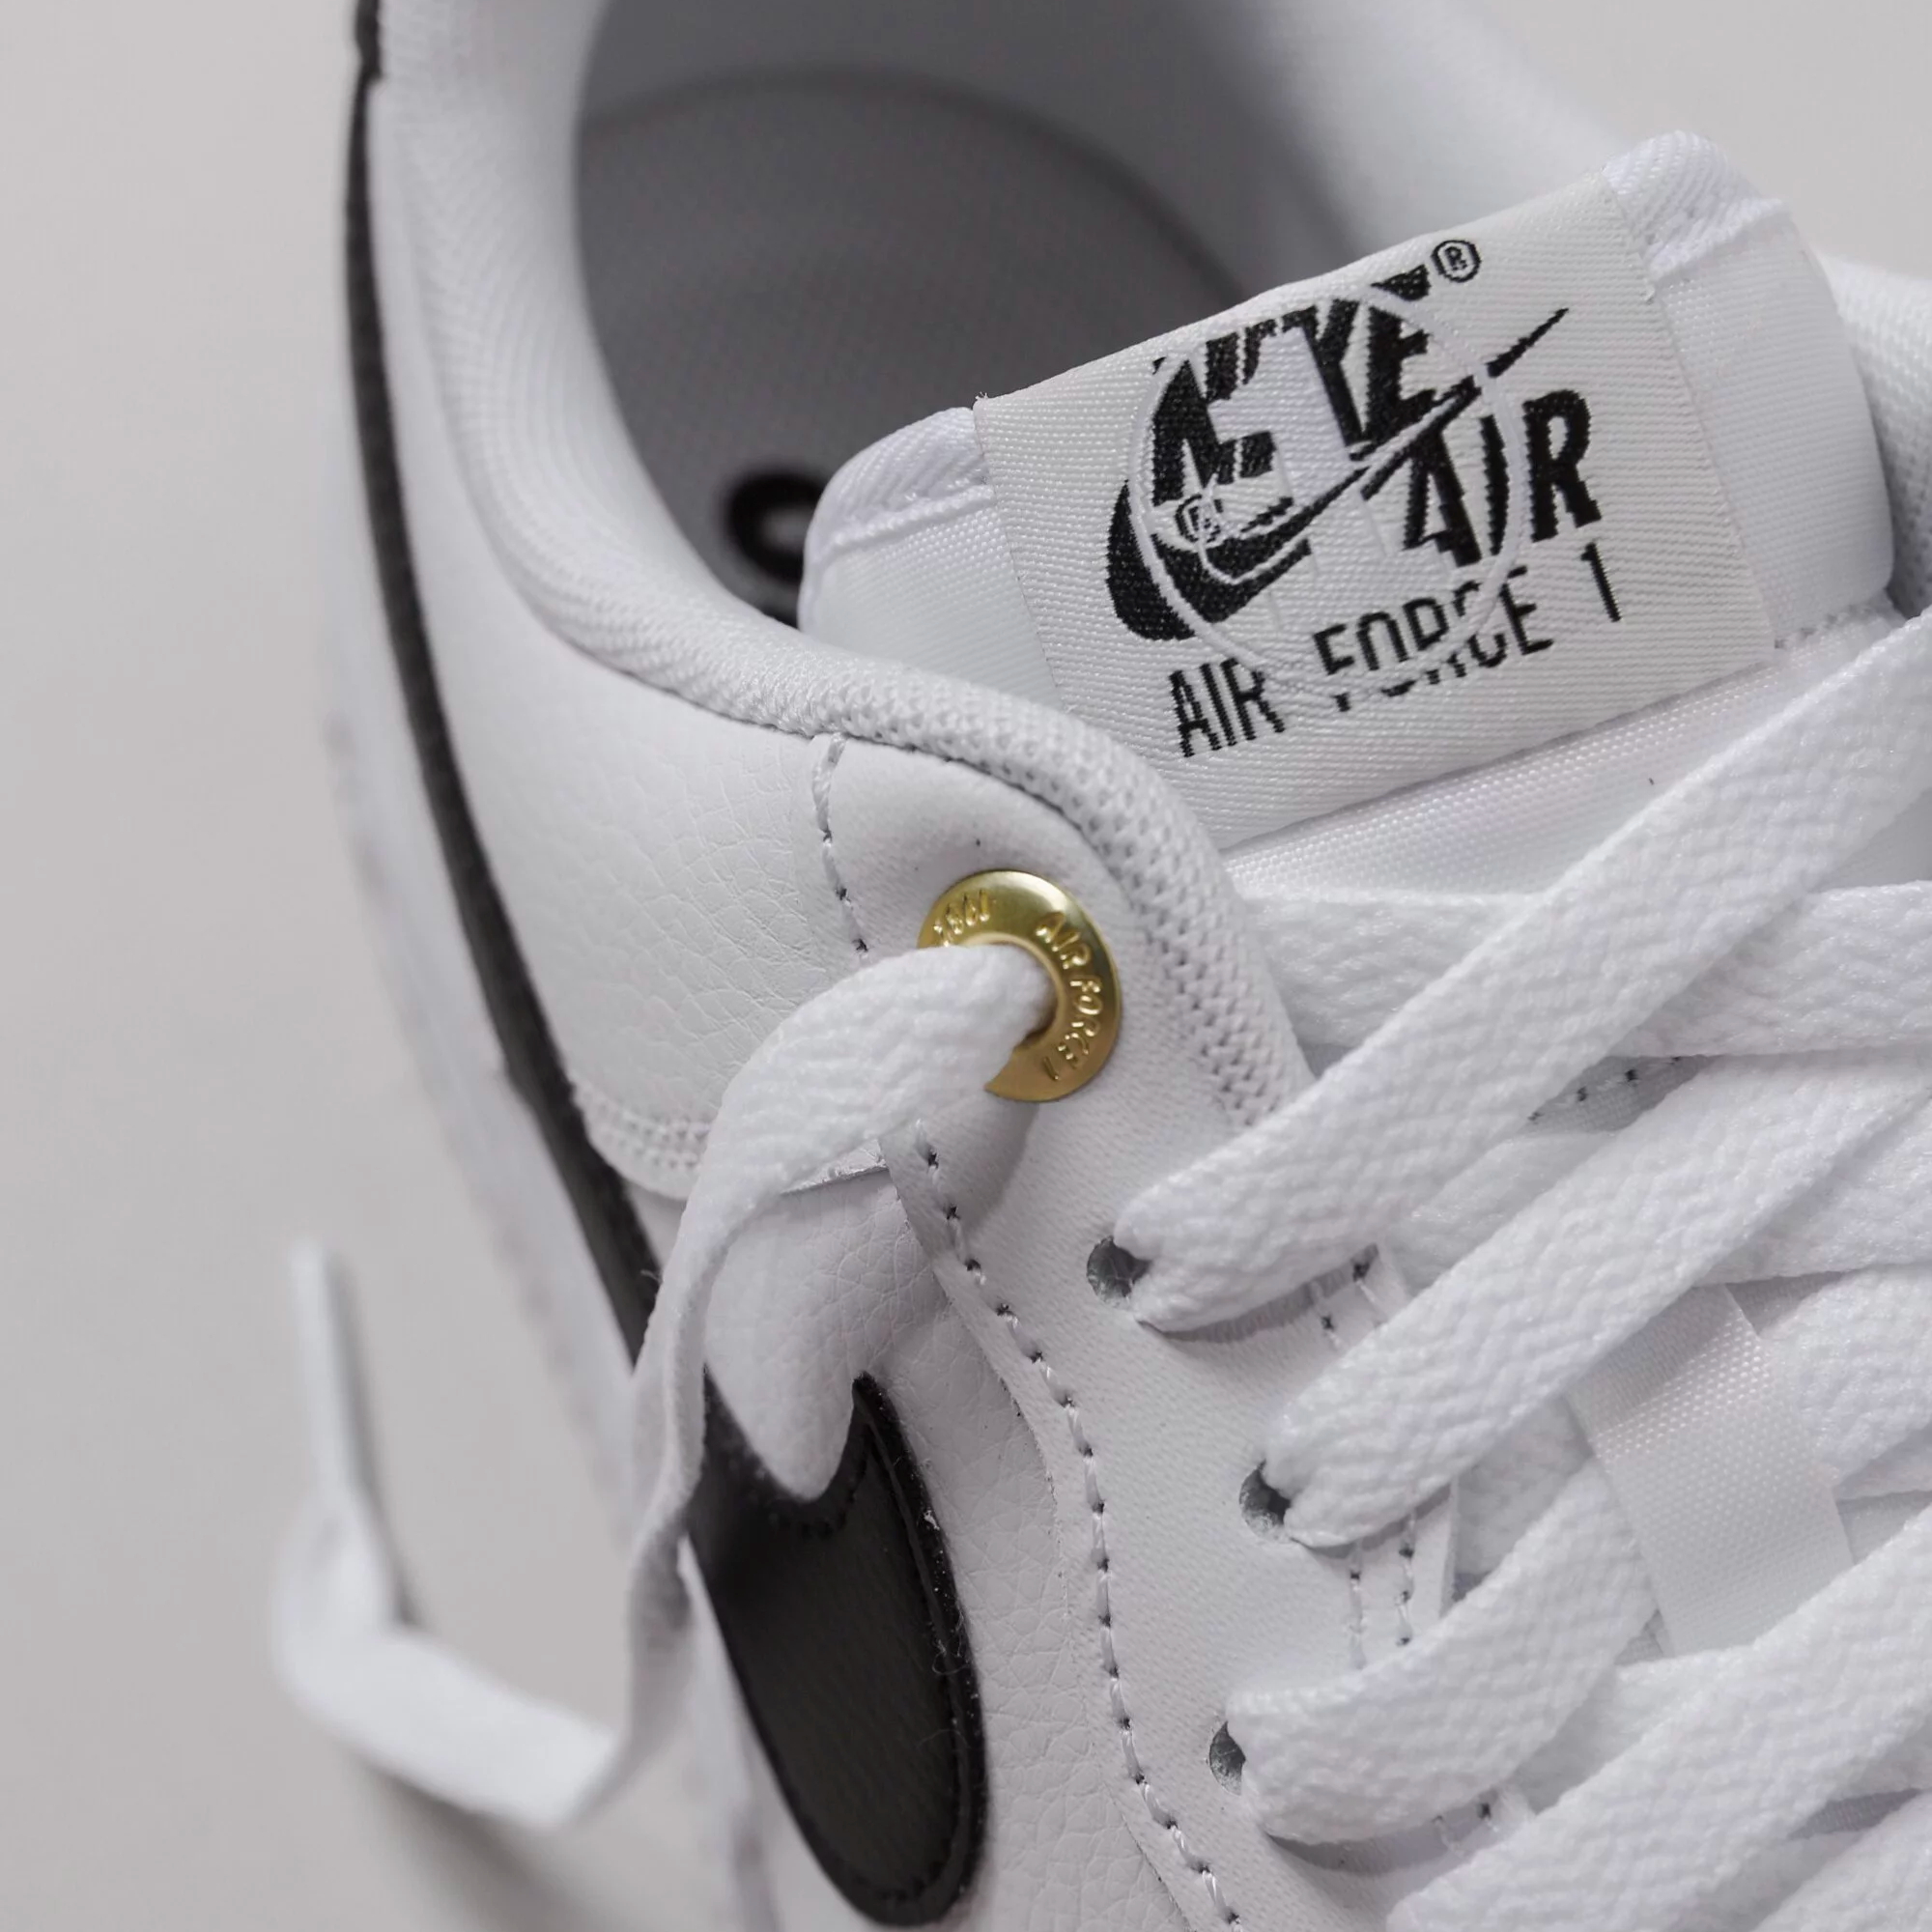 Nike Air Force 1 React Coconut Milk [DH7615-100] – hyped.